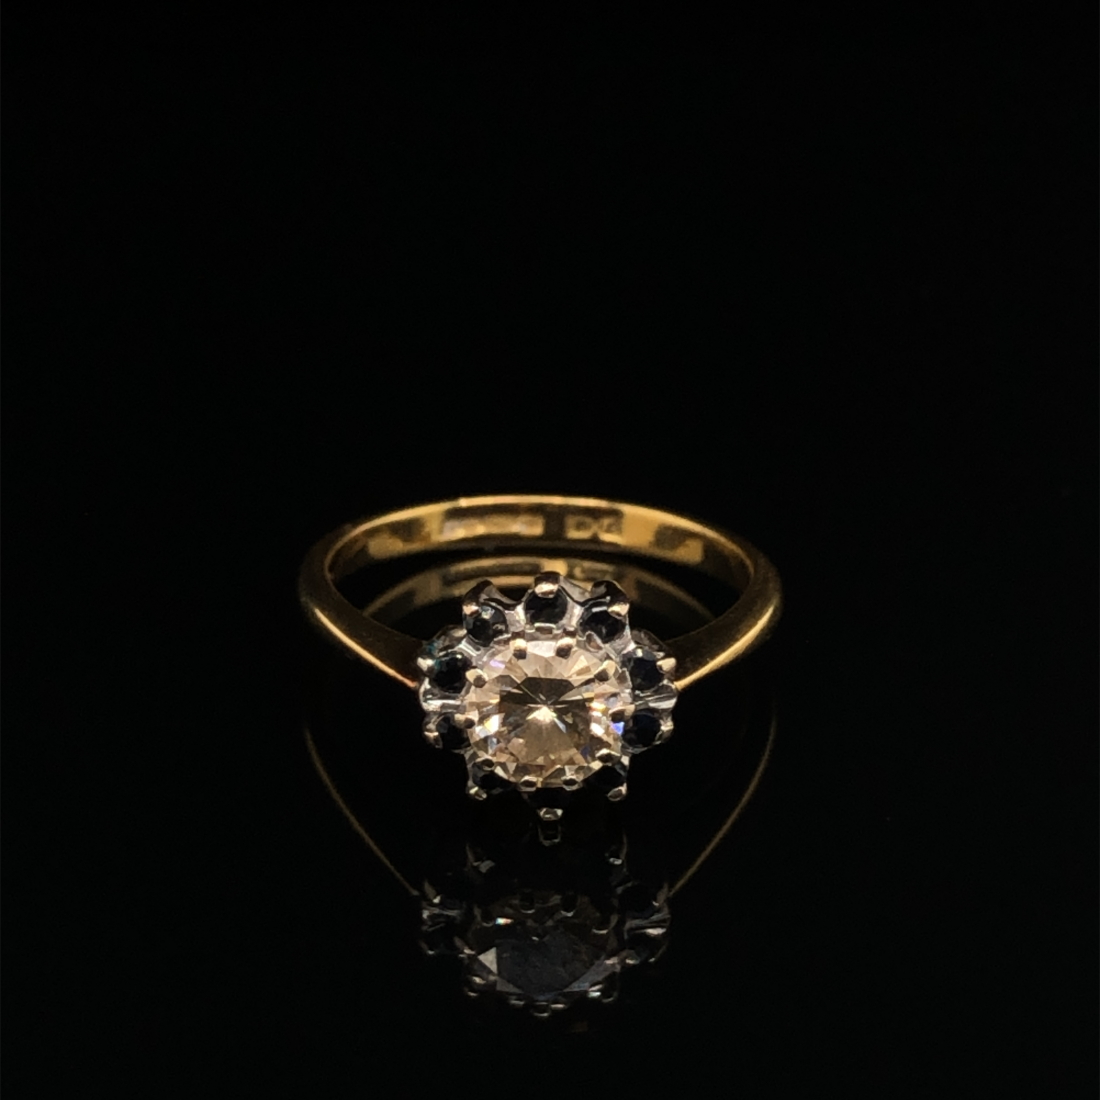 A DIAMOND AND SAPPHIRE ROUND CLUSTER RING. THE CENTRE DIAMOND A ROUND BRILLIANT CUT, ASSESSED - Image 8 of 10